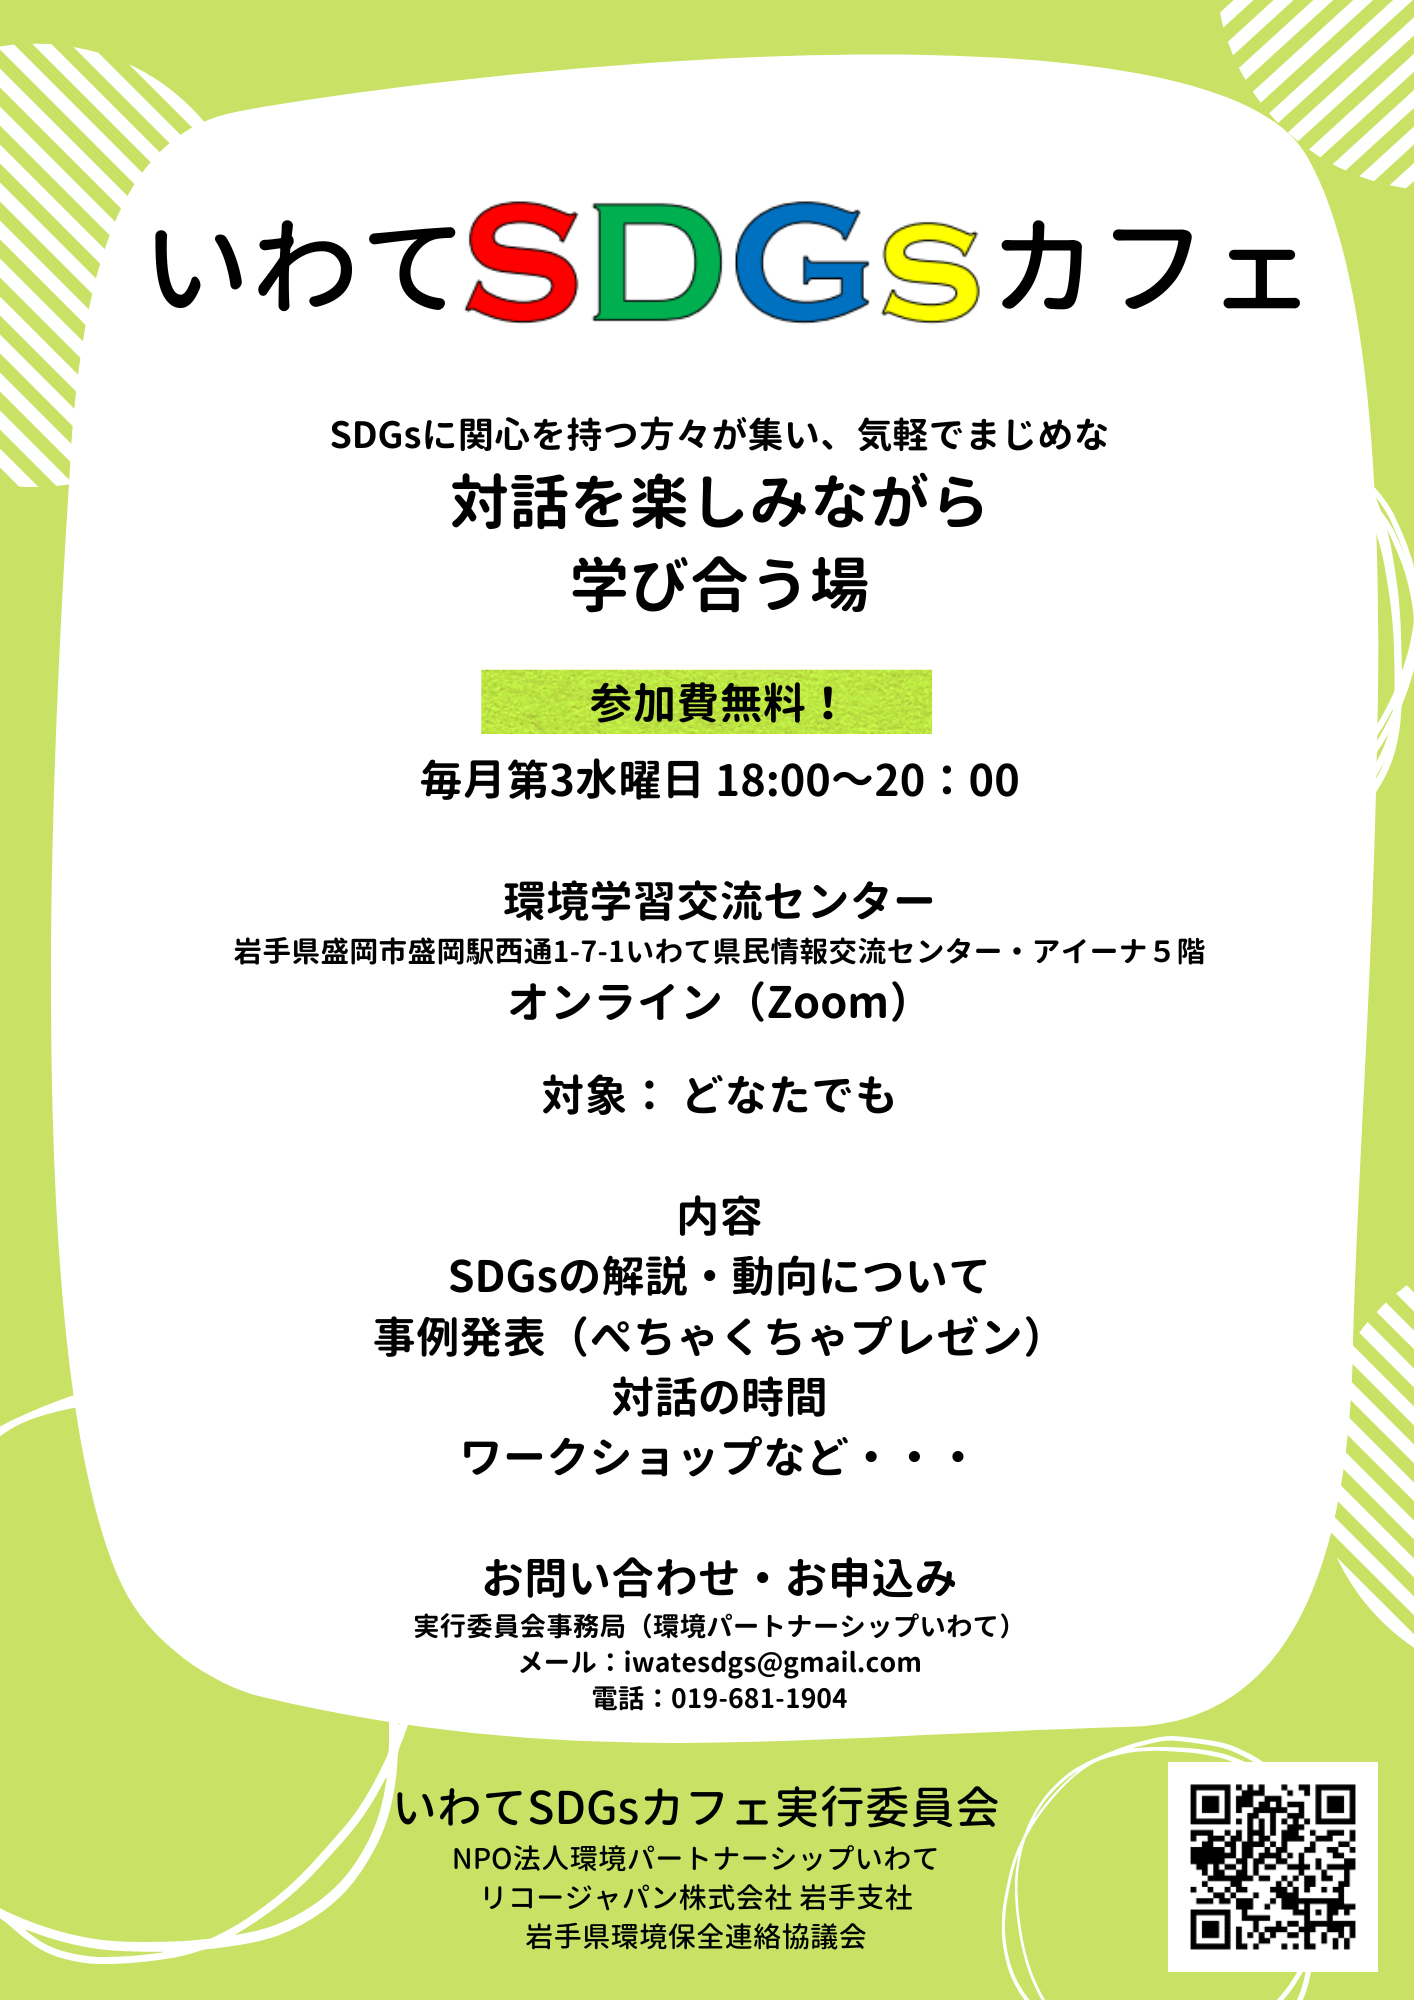 http://www.iwate-eco.jp/SDGs%E3%82%AB%E3%83%95%E3%82%A7%E3%83%81%E3%83%A9%E3%82%B7A.png